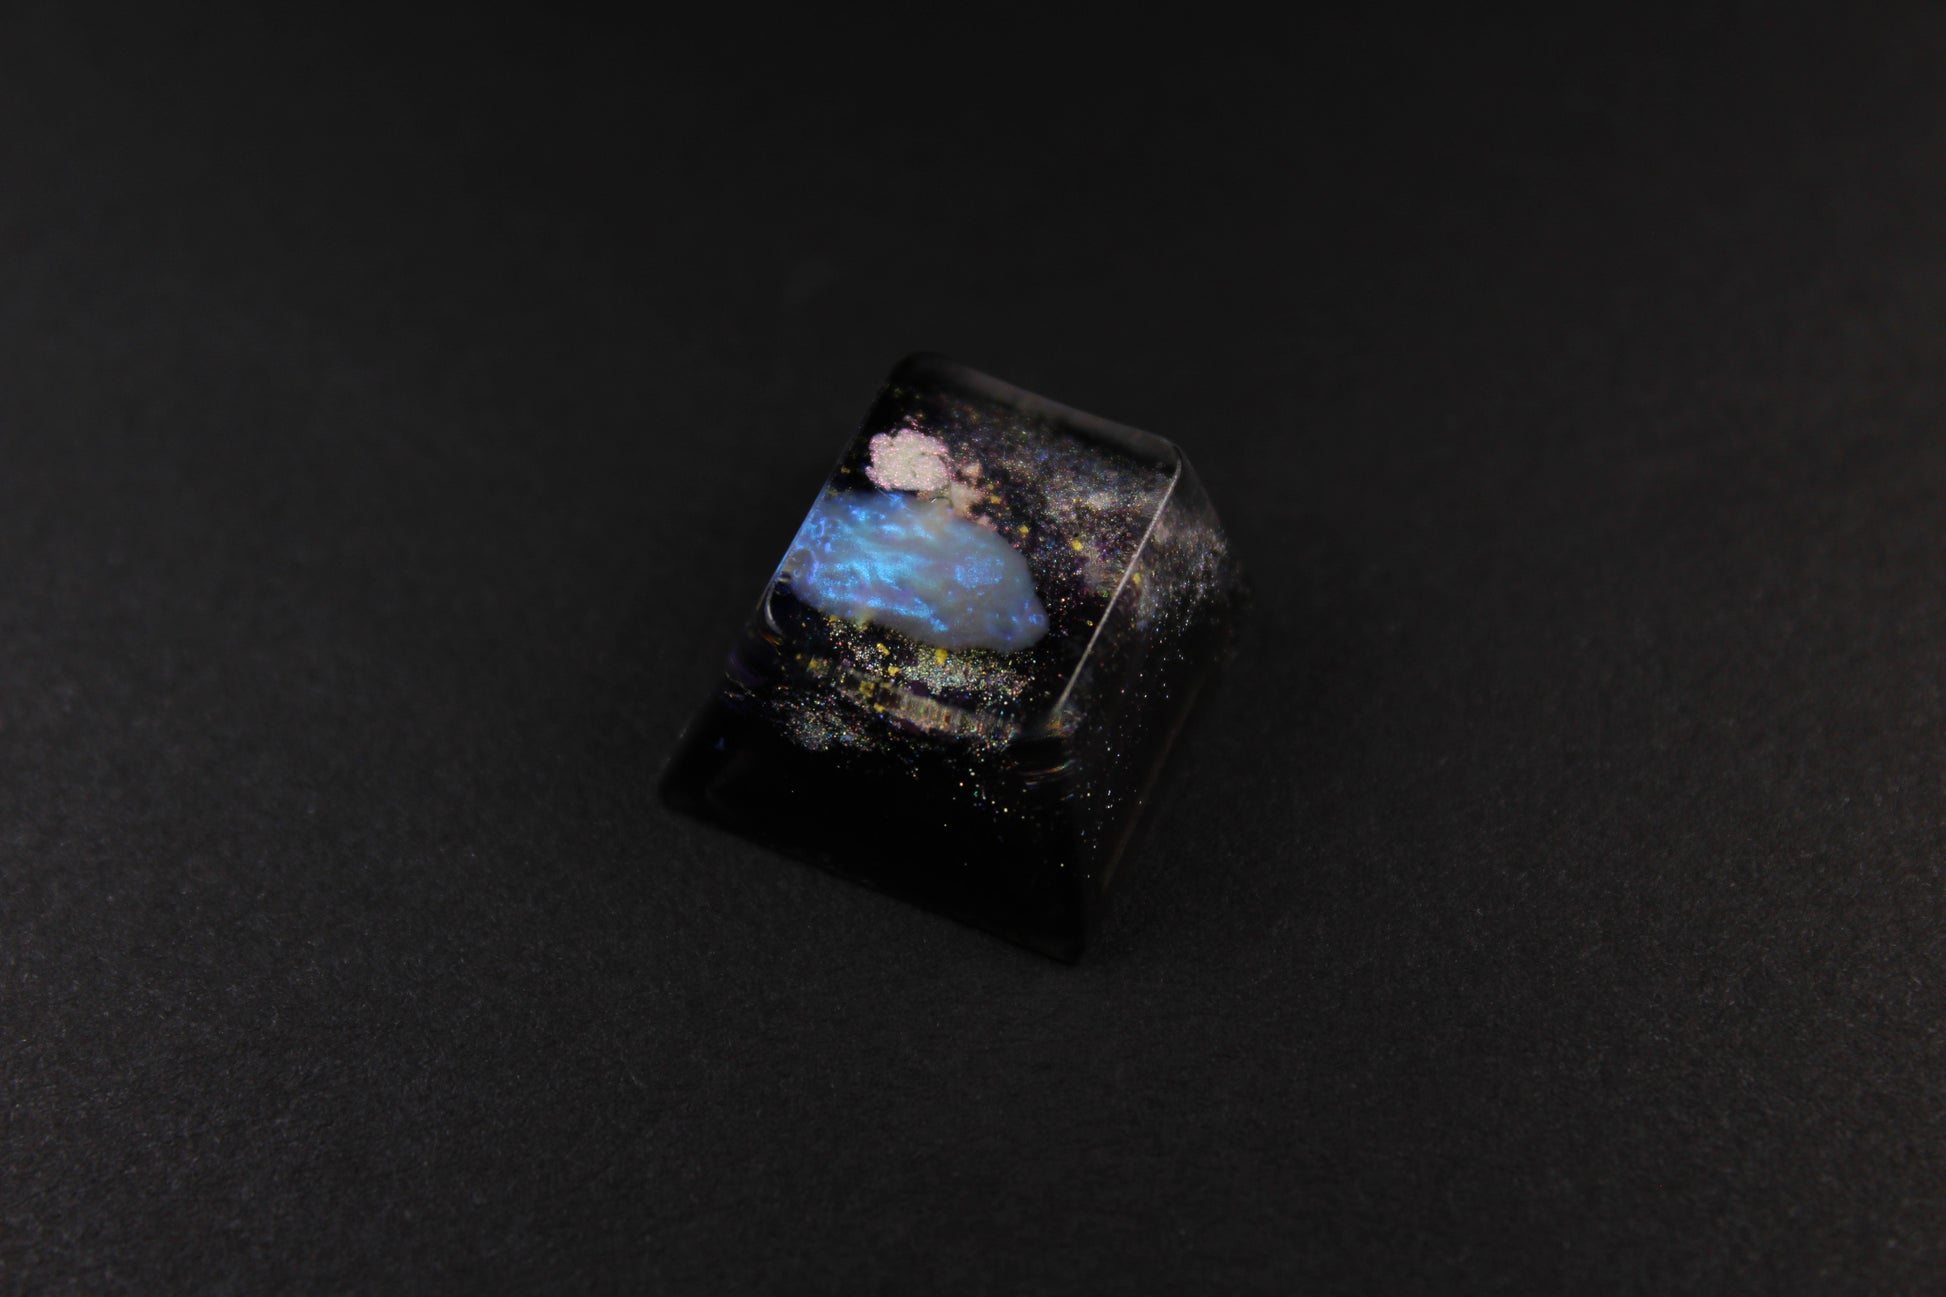 Cherry ESC - Event Horizon 2 - PrimeCaps Keycap - Blank and Sculpted Artisan Keycaps for cherry MX mechanical keyboards 